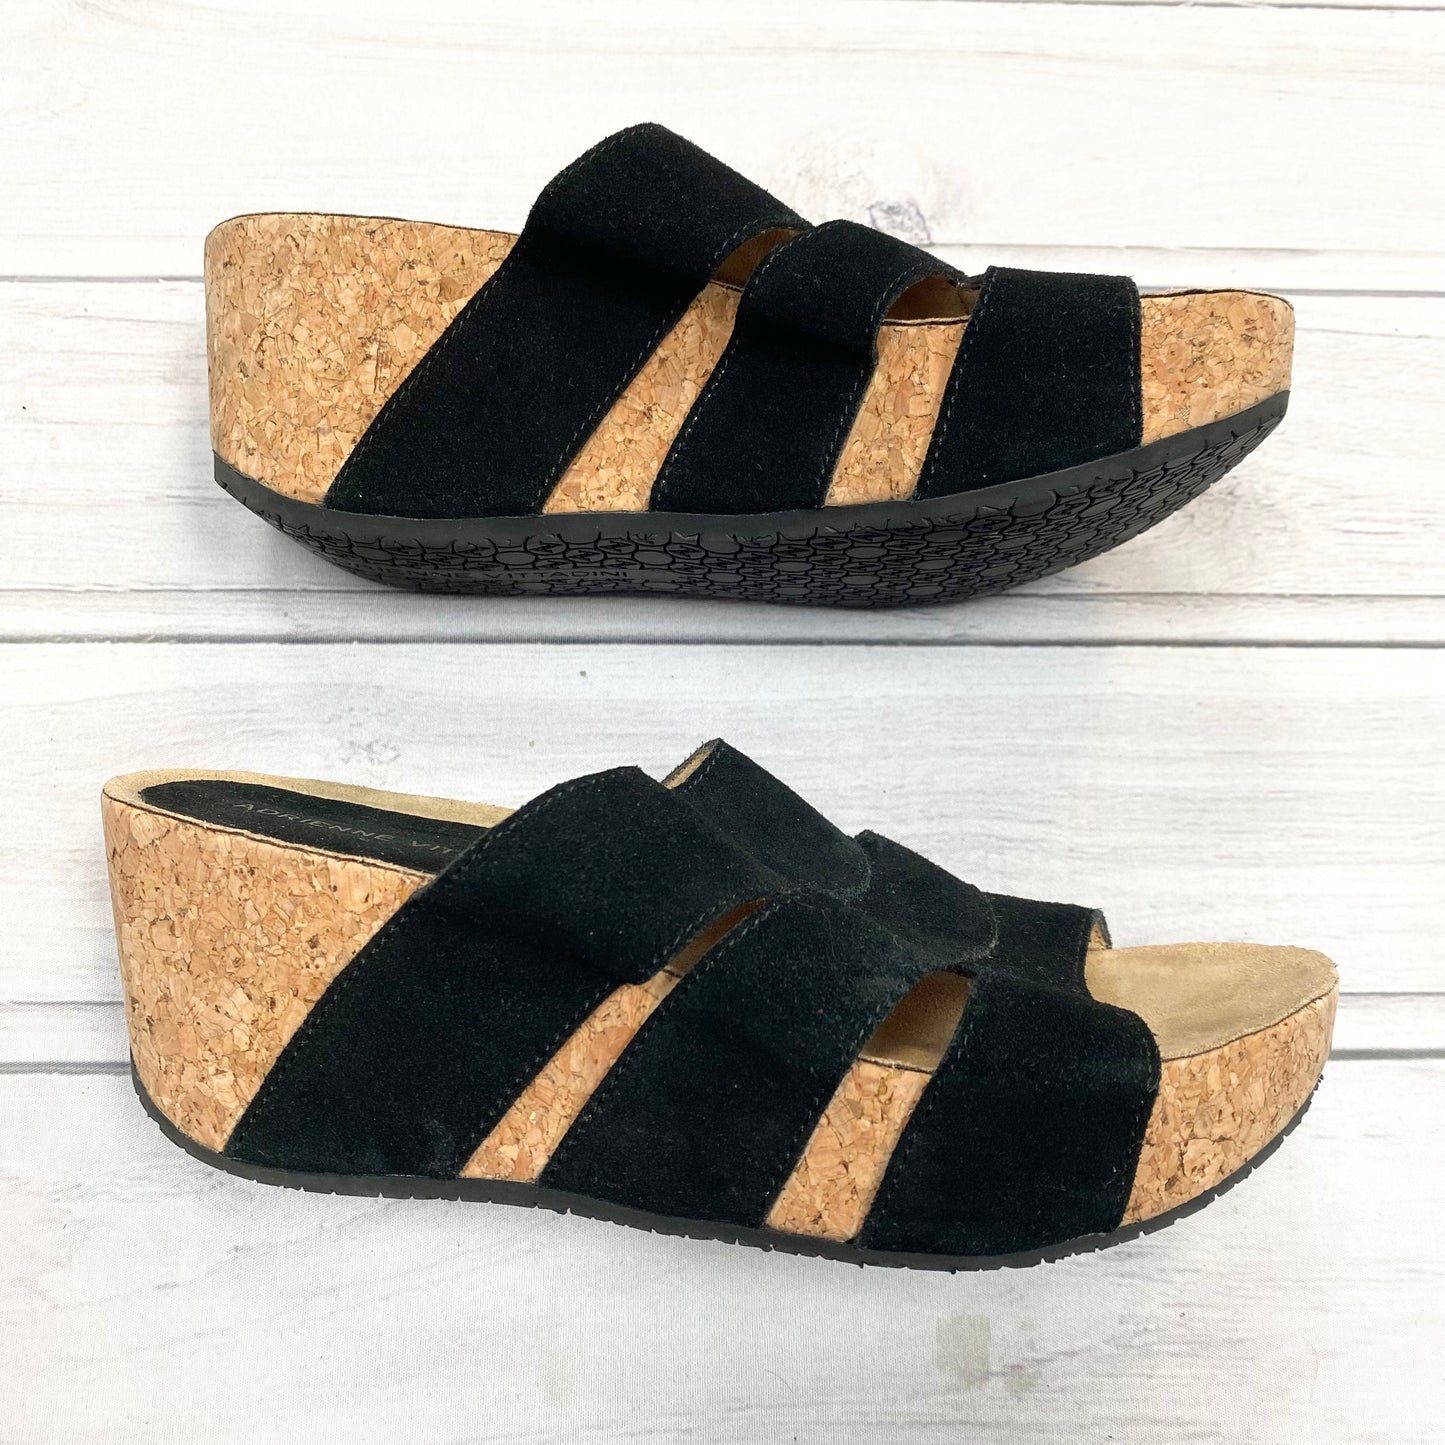 Sandals Heels Wedge By Adrienne Vittadini  Size: 5.5